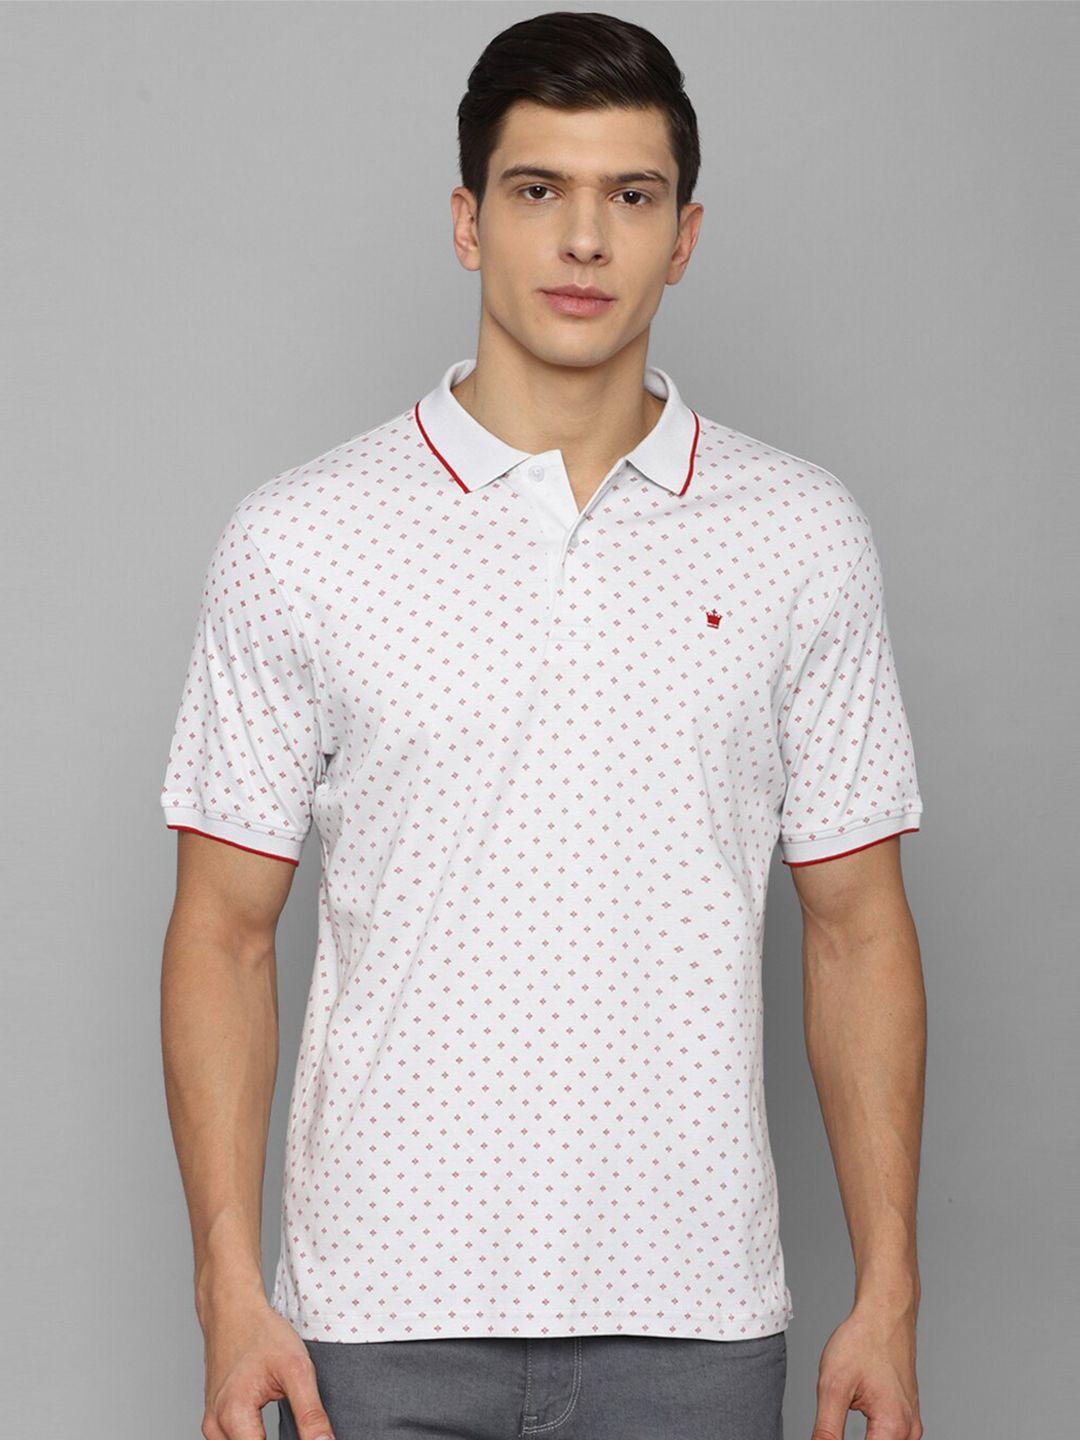 louis philippe men white & red printed polo pure cotton collar t-shirt